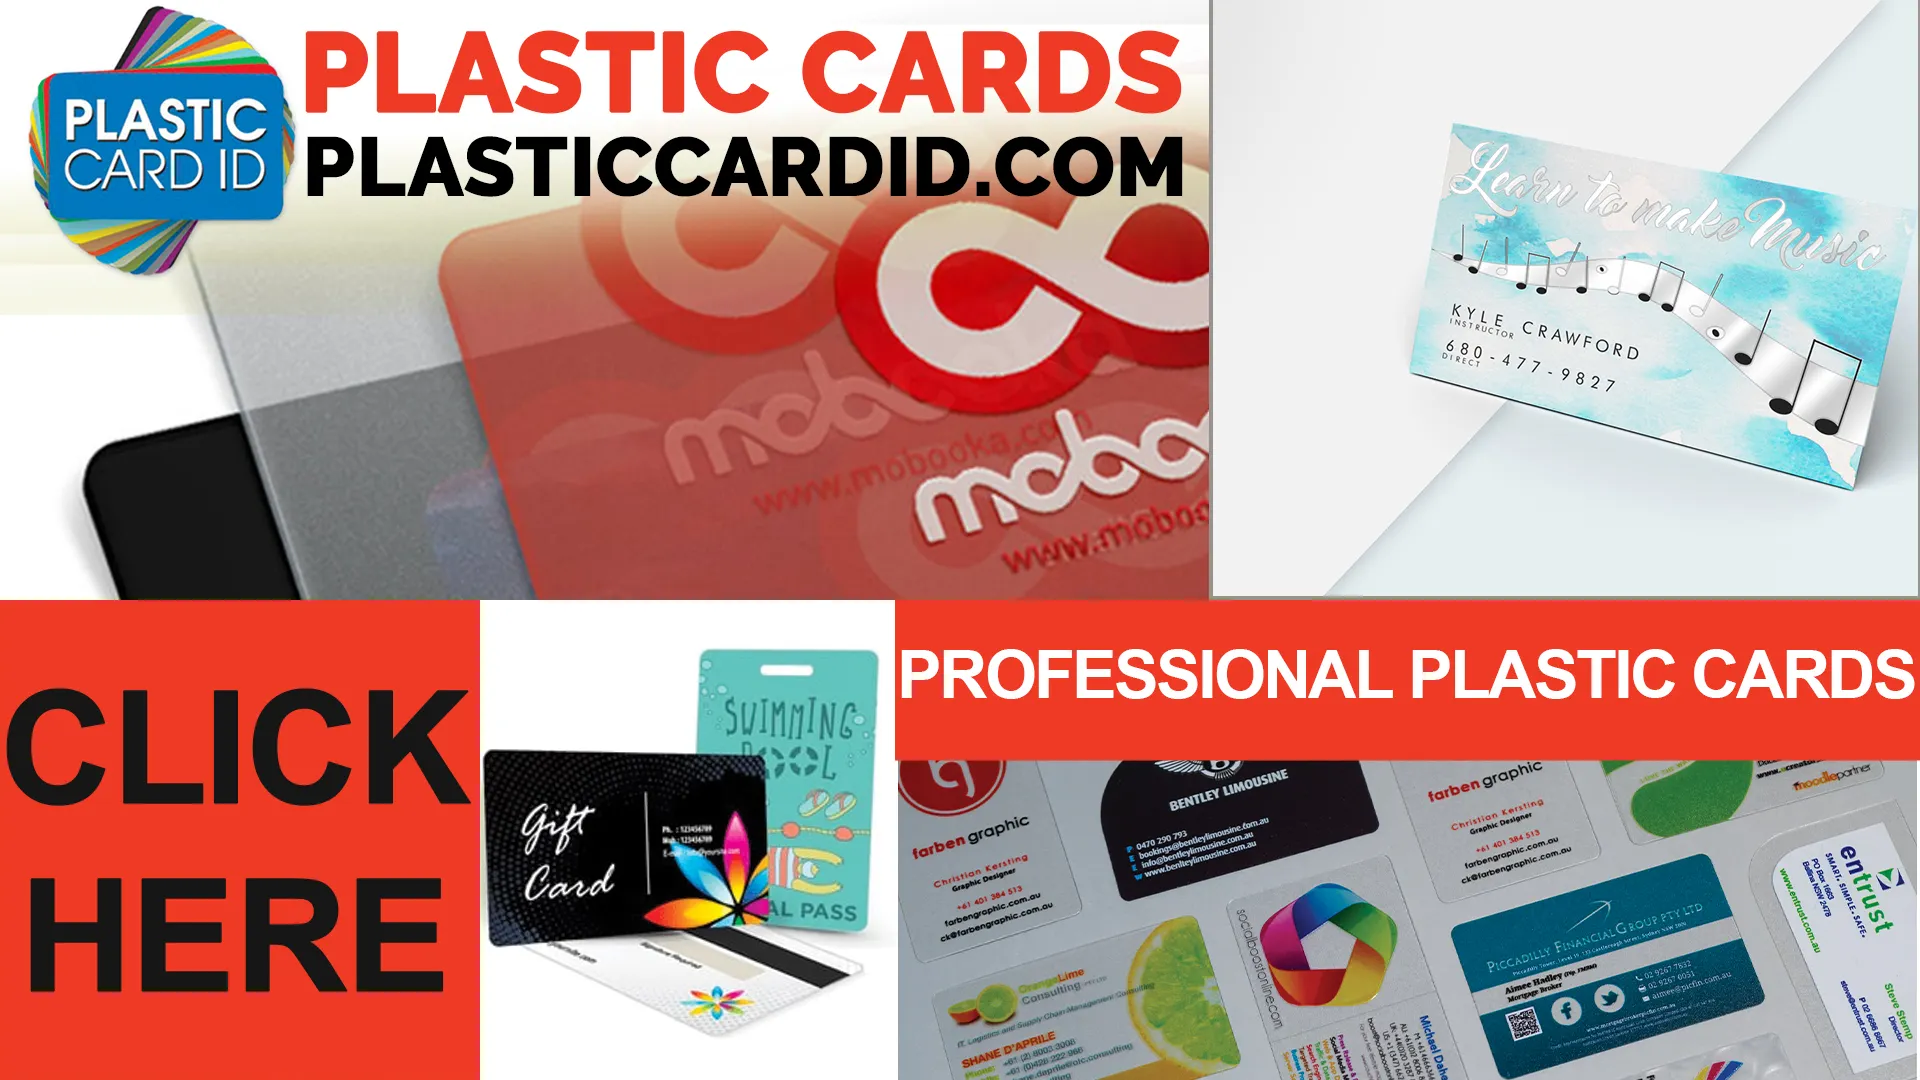 Superior Quality and Durability of Our Cards